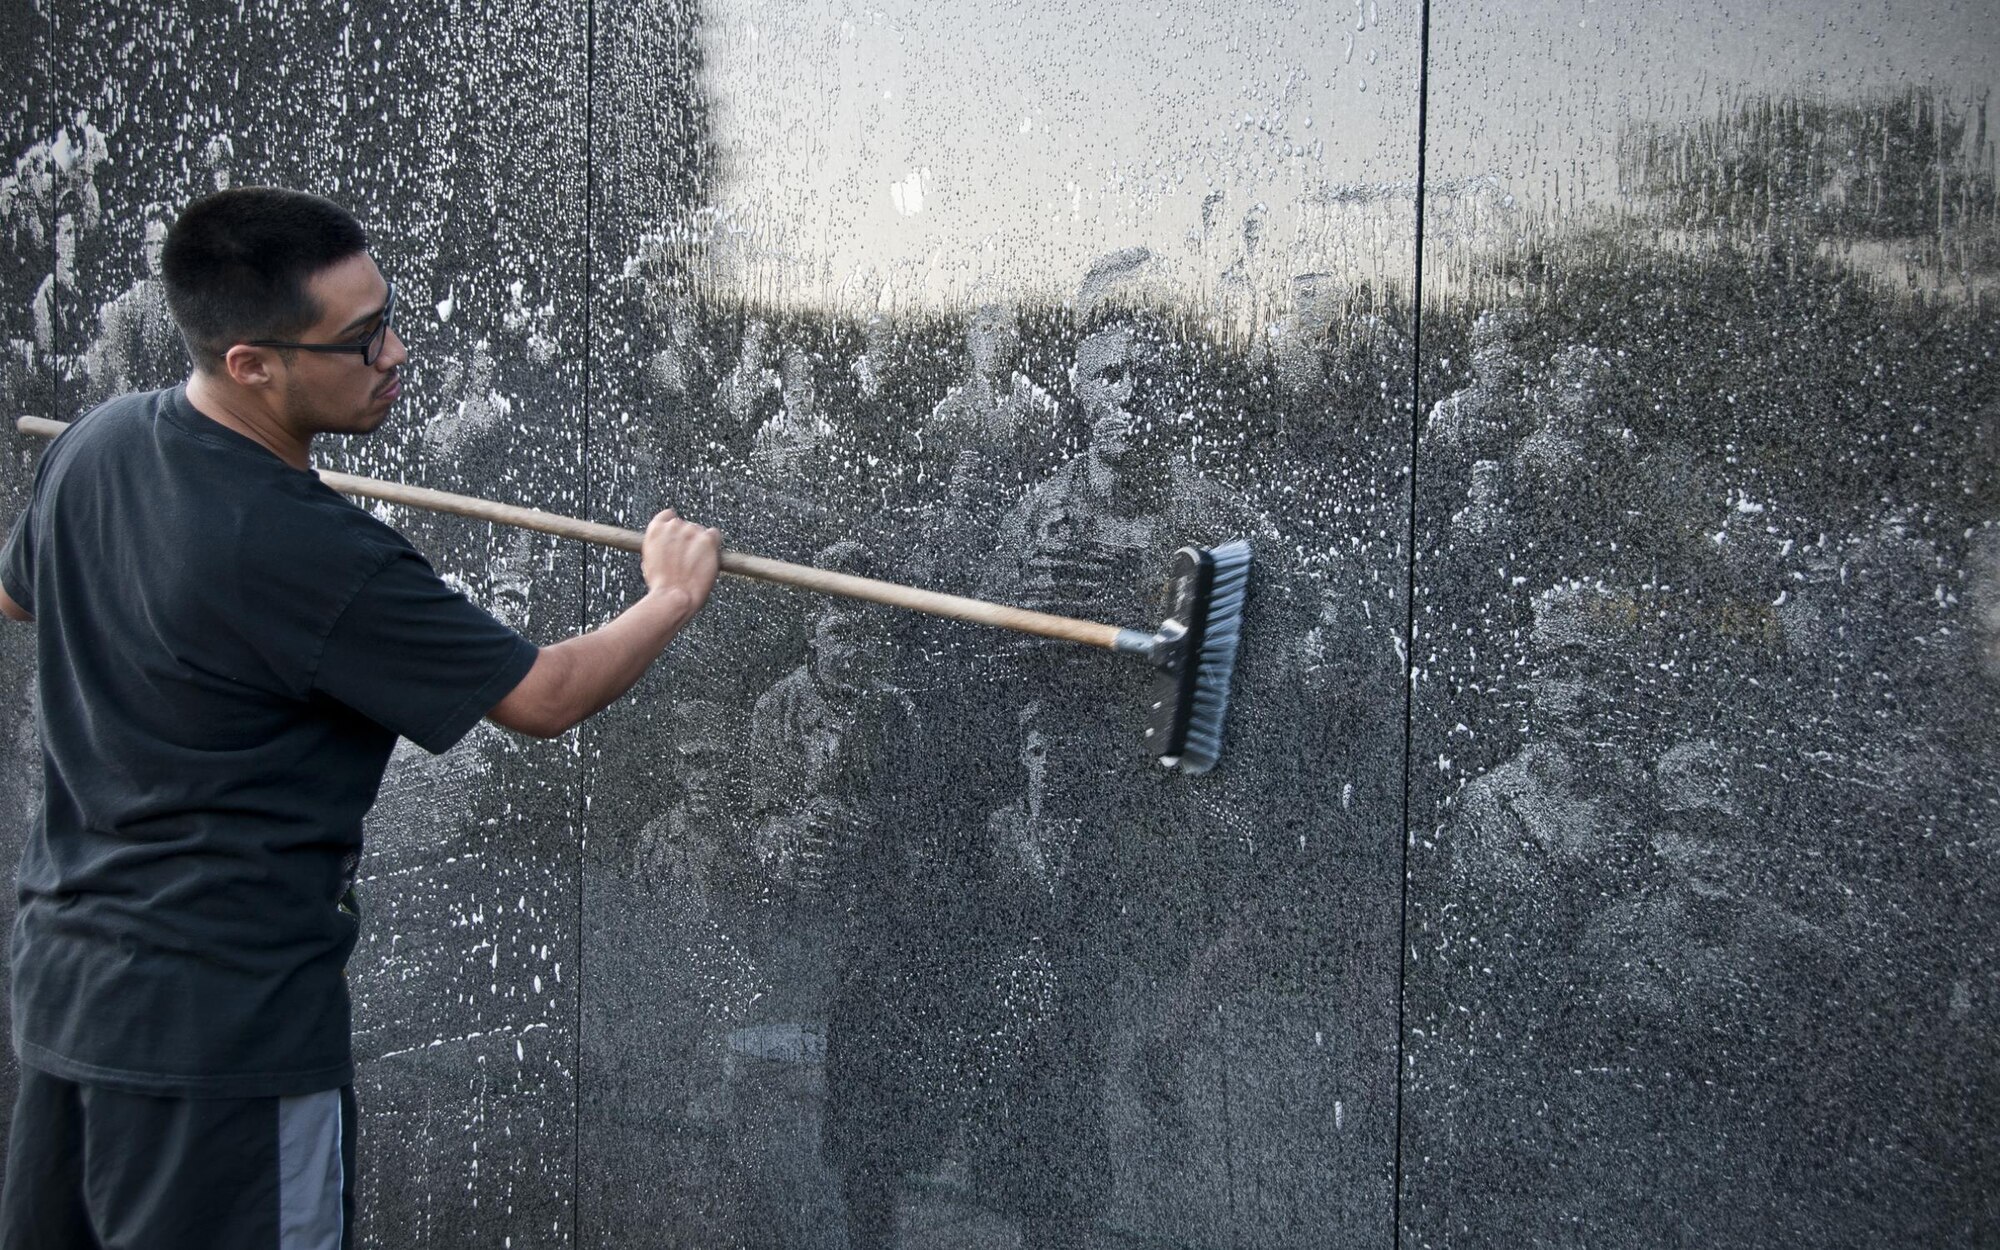 Staff Sgt. José Nunez, 459th Maintenance Squadron crew chief, washes the Korean War Veterans Memorial wall in Washington D.C., July 17, 2016. Members of the 459th Air Refueling Wing and their families volunteered to clean the memorial prior to its opening to the public for the day. (U.S. Air Force photo/Staff Sgt. Kat Justen)